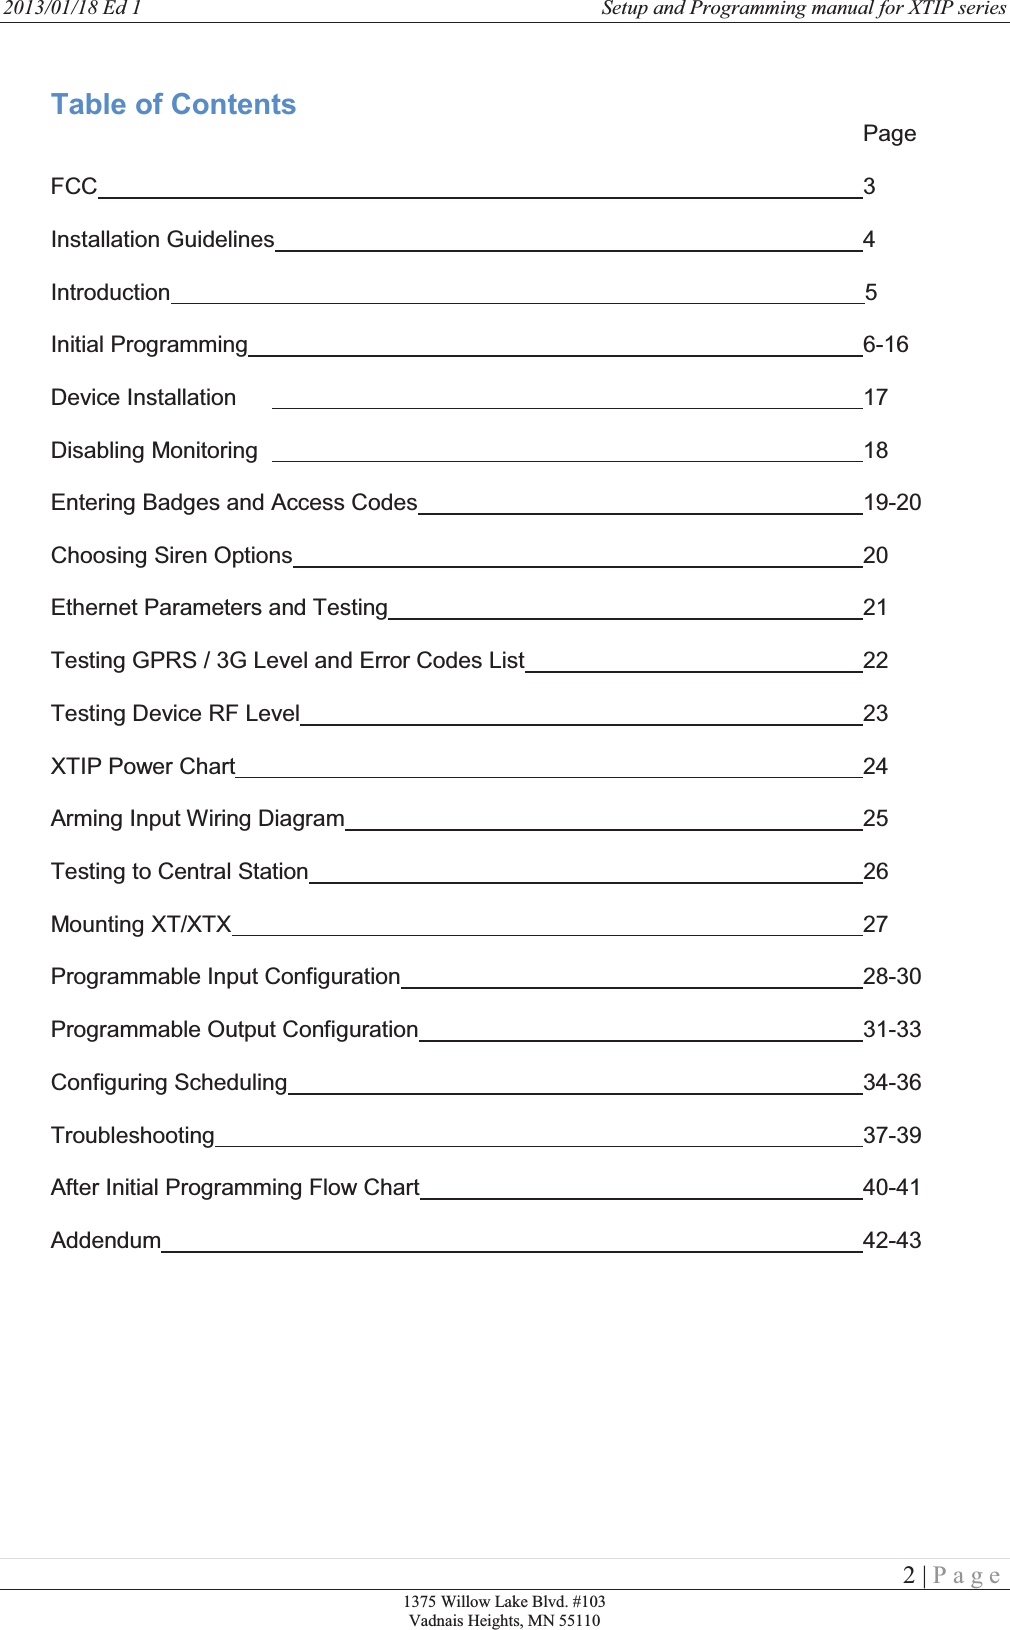 2013/01/18 Ed 1    Setup and Programming manual for XTIP series   2 | Page 1375 Willow Lake Blvd. #103 Vadnais Heights, MN 55110                                                      Table of Contents            Page  FCC                                  3  Installation Guidelines        4  Introduction                                                                                                             5  Initial Programming         6-16  Device Installation         17  Disabling Monitoring         18   Entering Badges and Access Codes       19-20  Choosing Siren Options        20  Ethernet Parameters and Testing       21  Testing GPRS / 3G Level and Error Codes List     22  Testing Device RF Level        23  XTIP Power Chart         24  Arming Input Wiring Diagram        25  Testing to Central Station                                                                                       26  Mounting XT/XTX         27  Programmable Input Configuration       28-30  Programmable Output Configuration       31-33  Configuring Scheduling        34-36  Troubleshooting         37-39  After Initial Programming Flow Chart      40-41  Addendum          42-43     